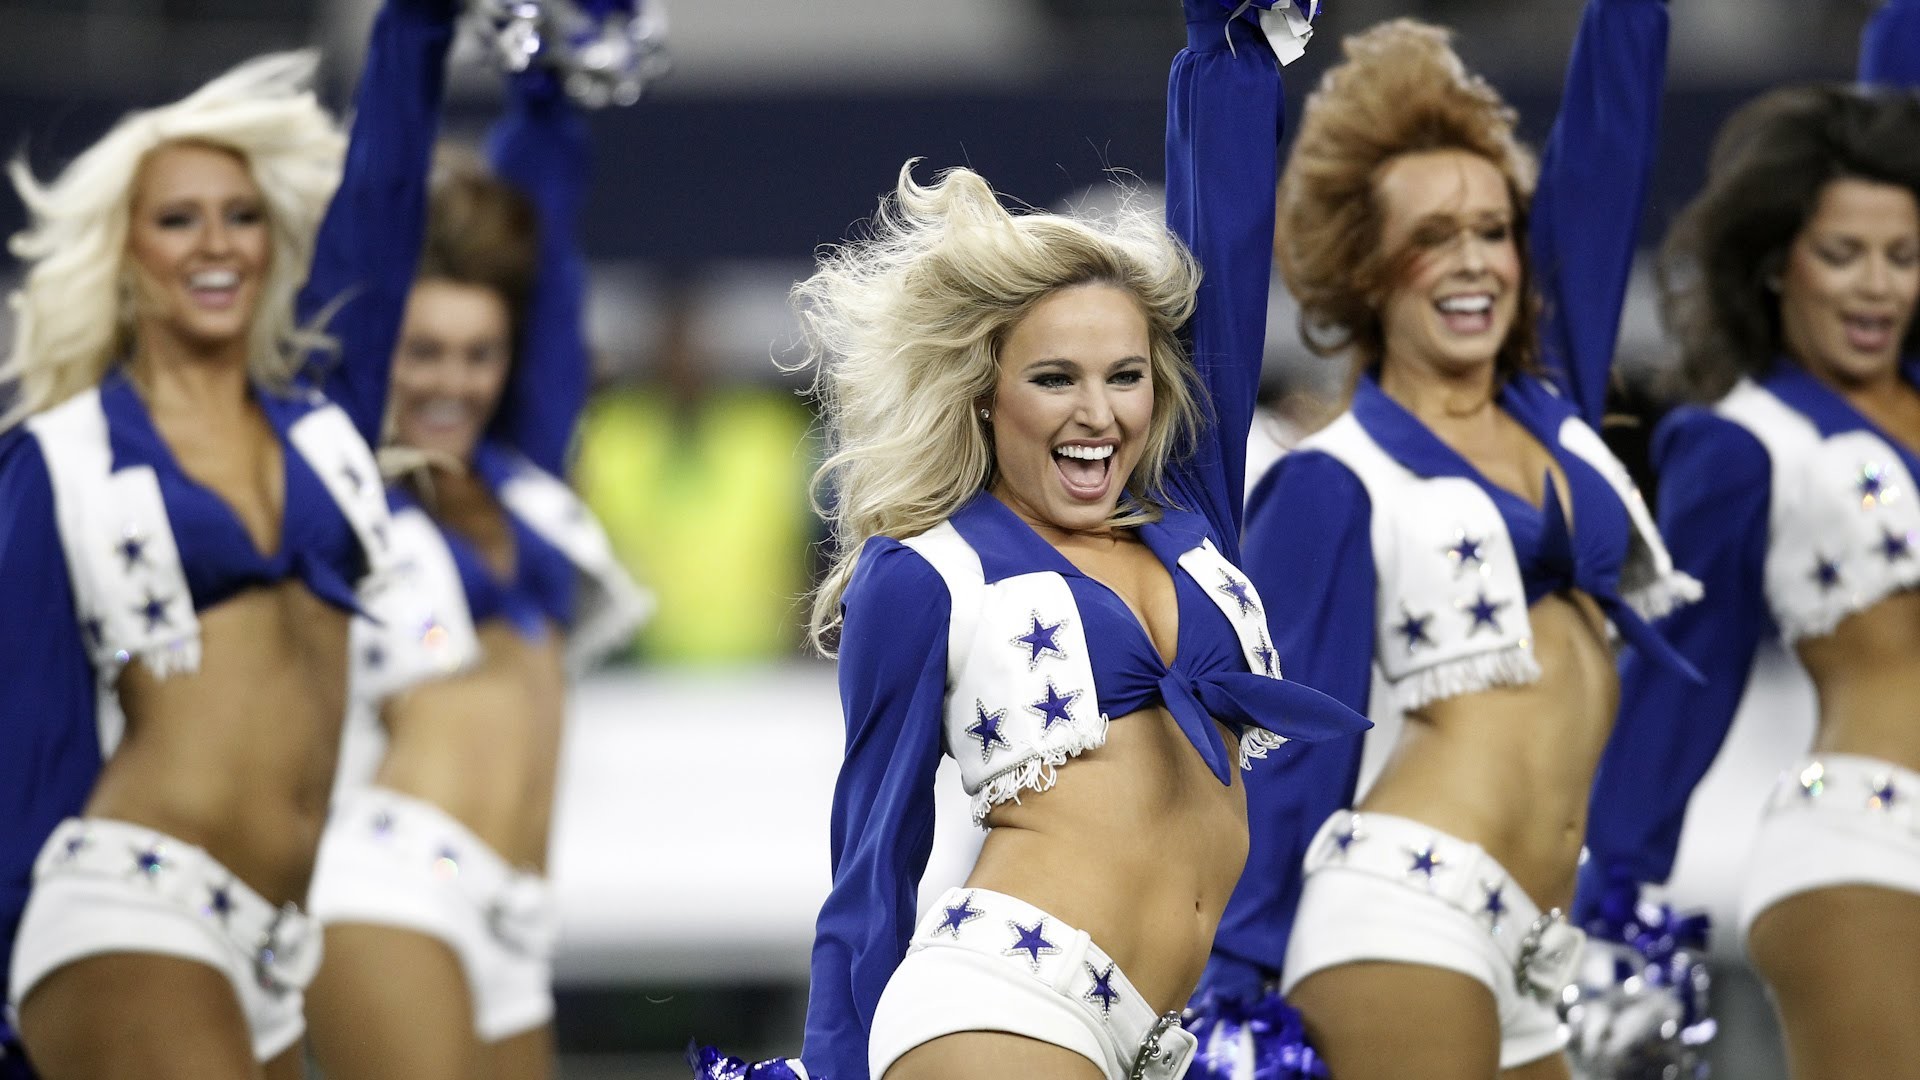 Dallas Cowboys cheerleaders celebrate in locker room after comeback win  against the Giants – YouTube